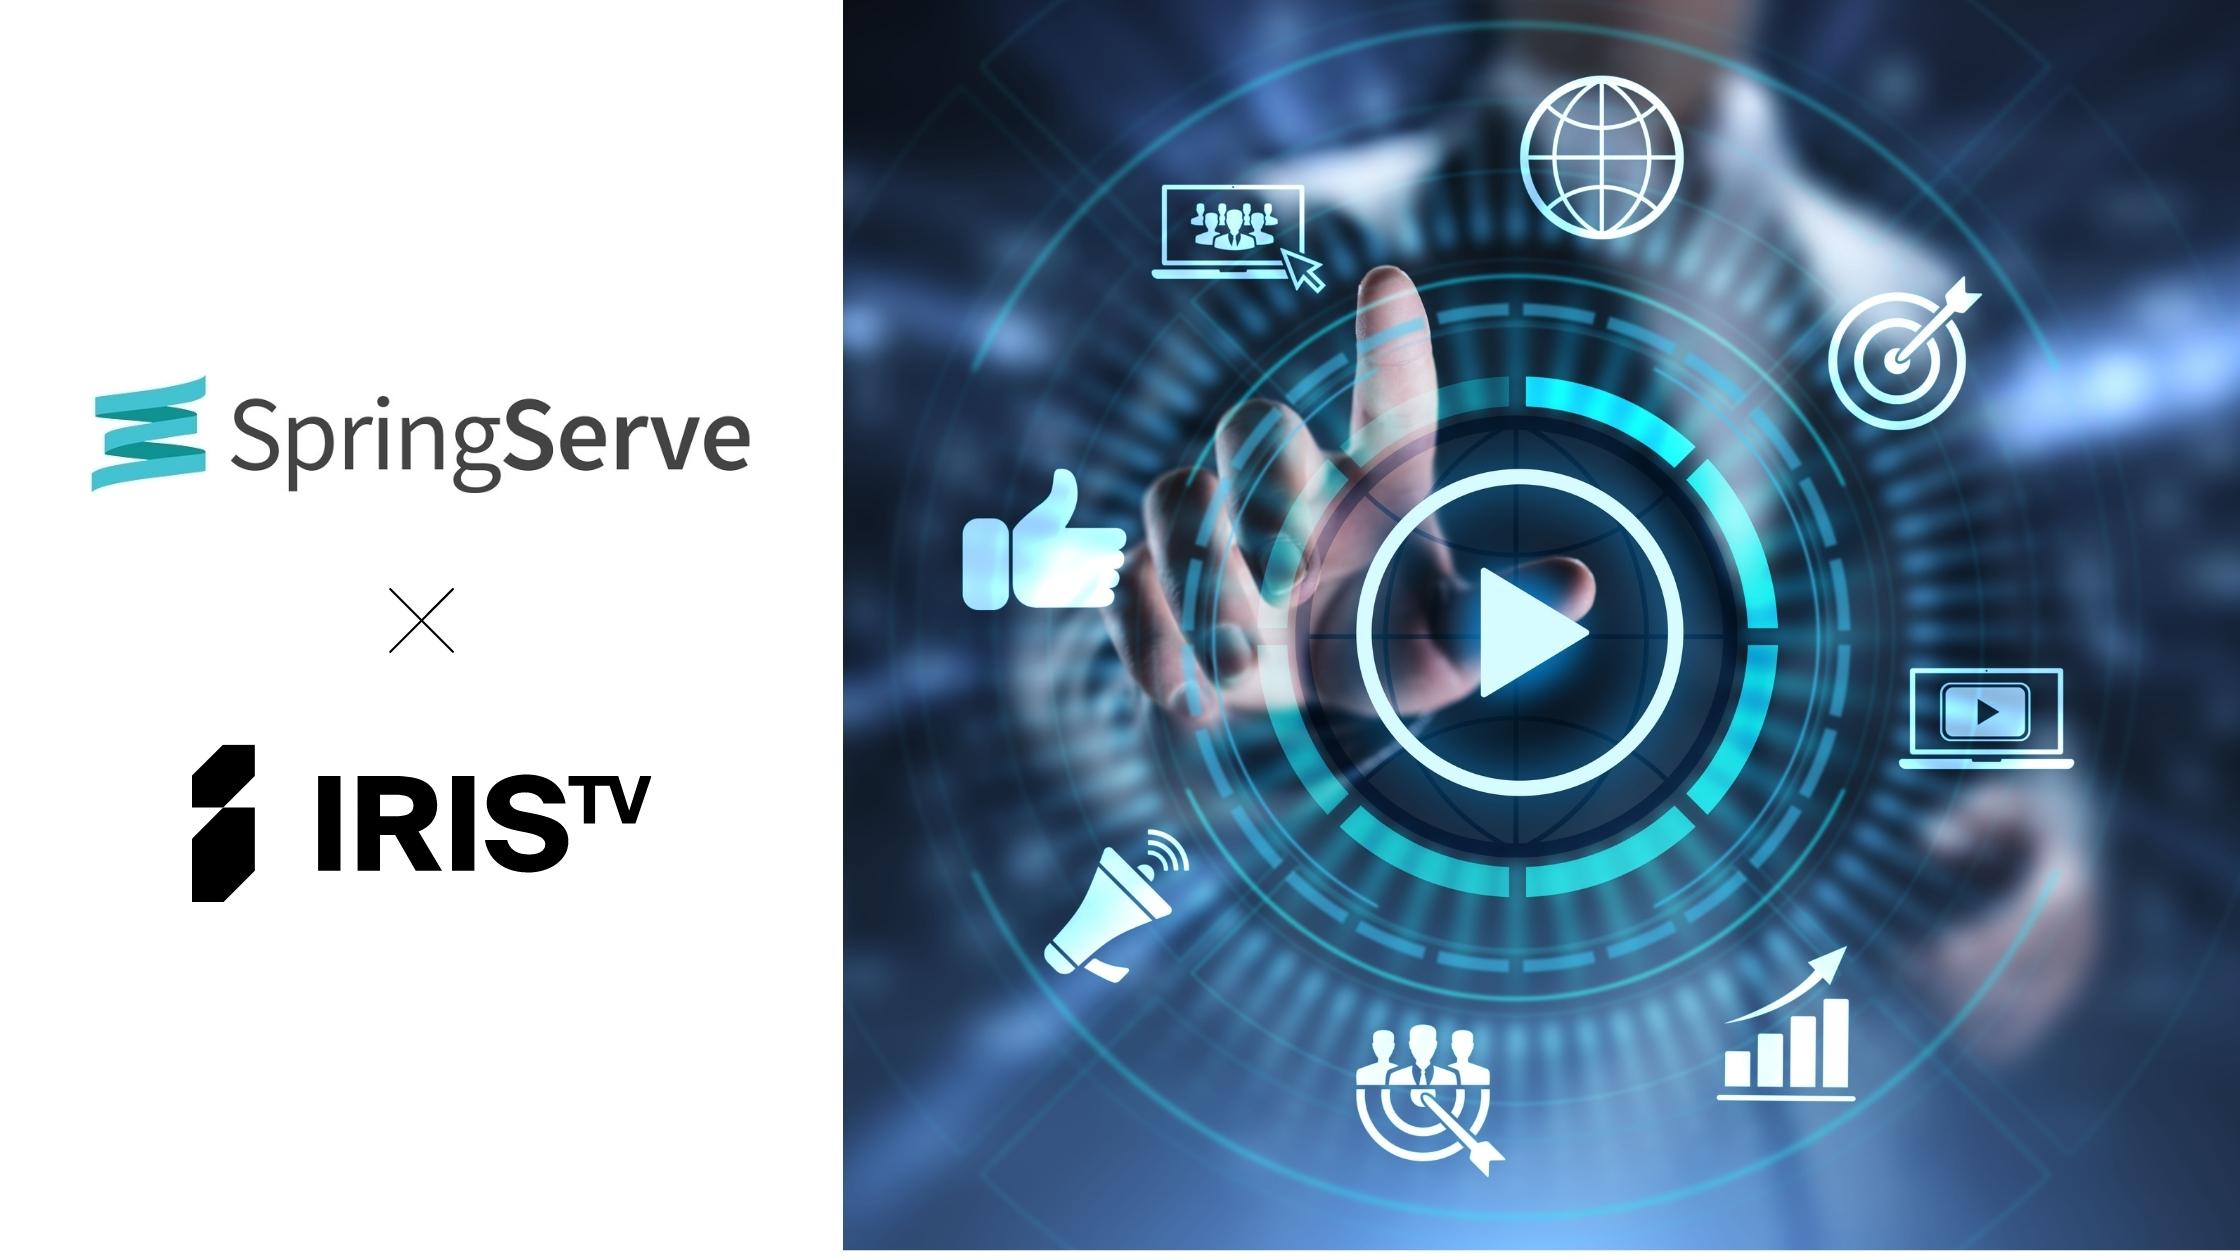 SpringServe Expands Integration with IRIS.TV to Provide Publishers with Contextual Targeting for Direct Deals